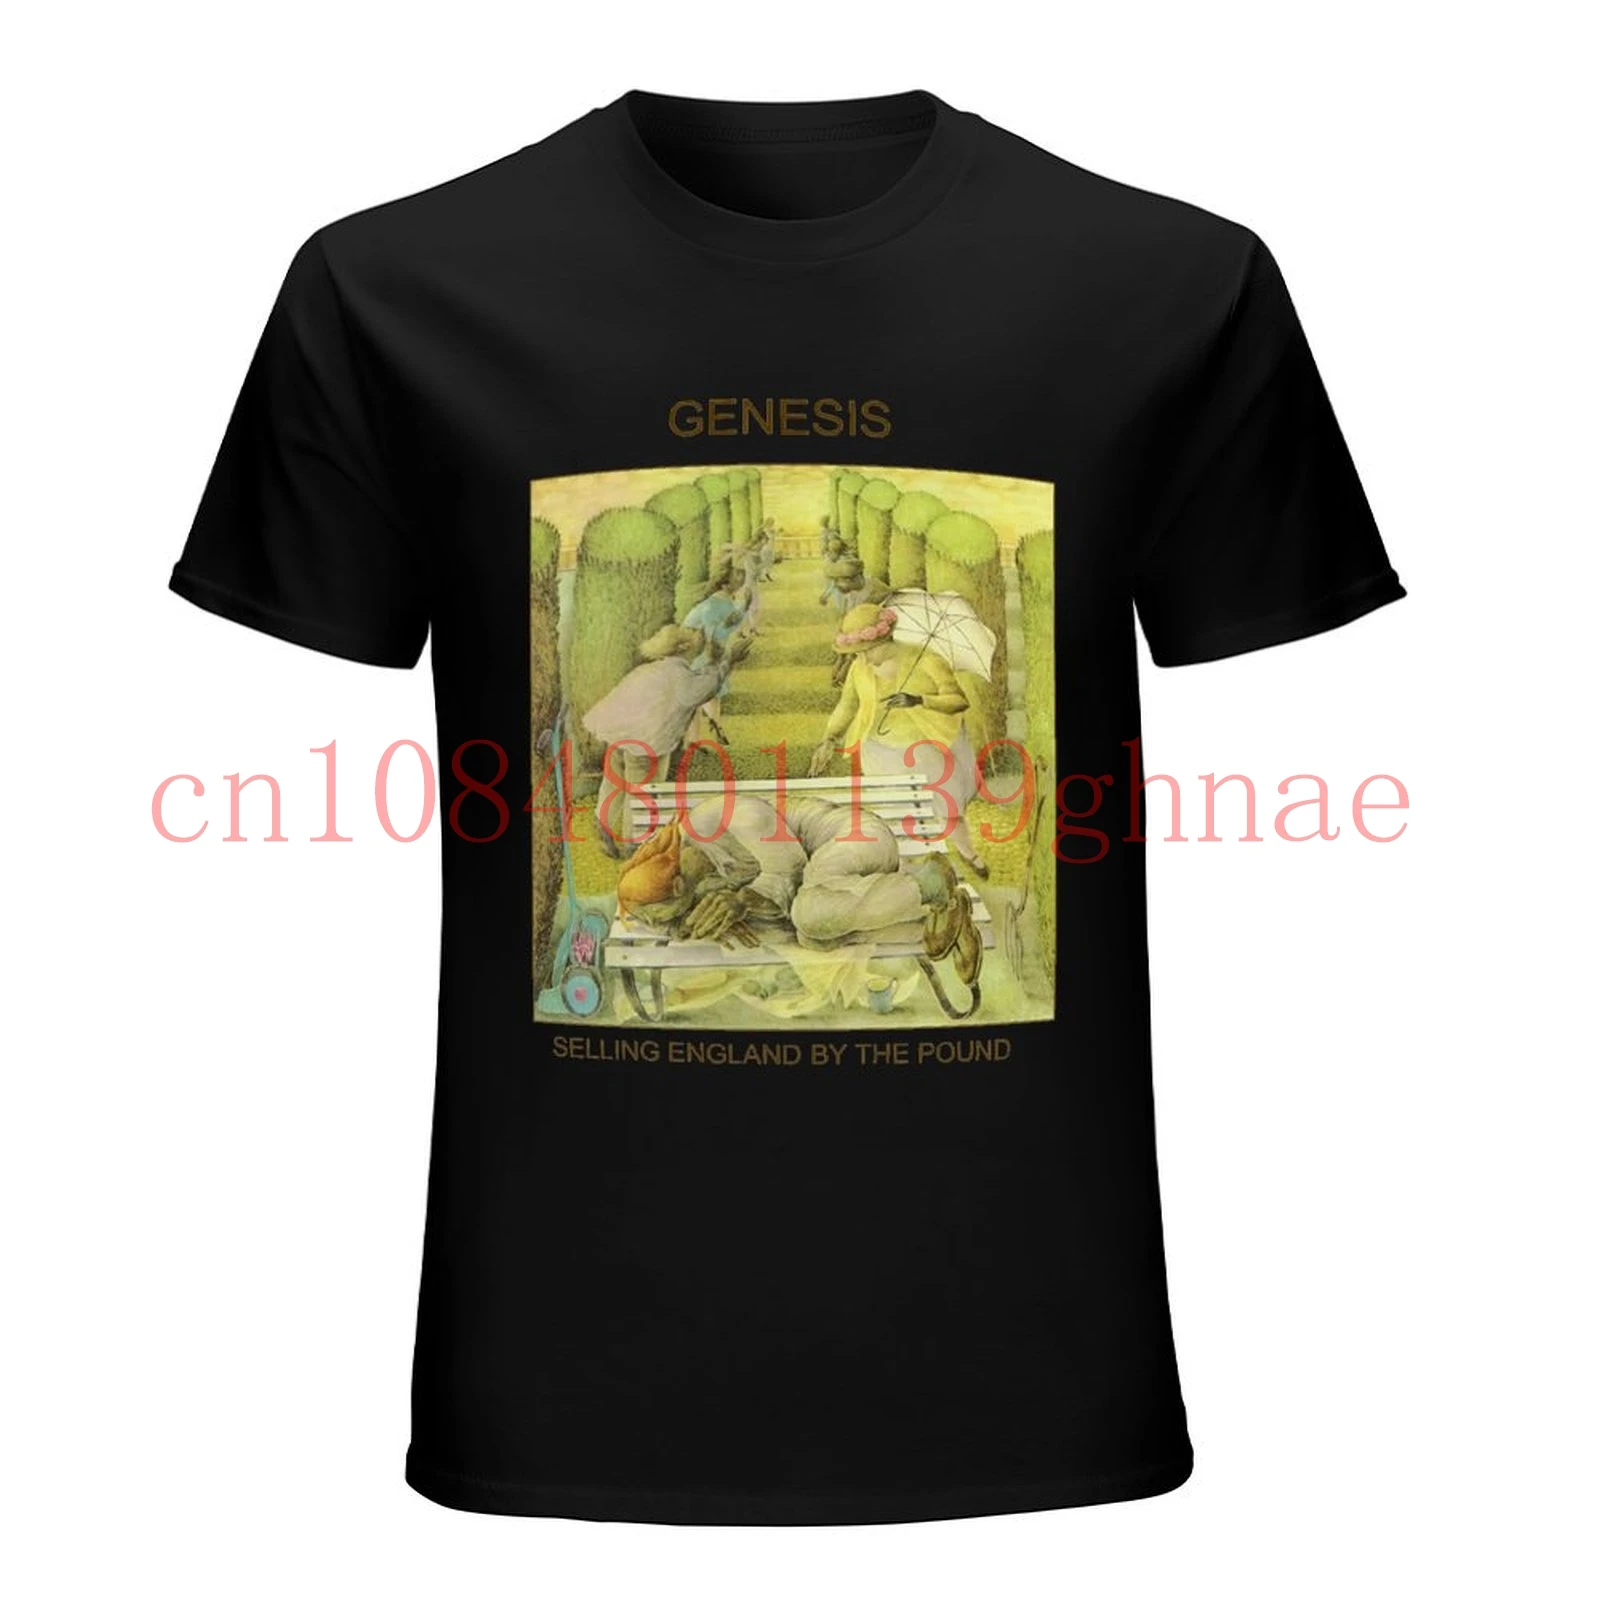 

Genesis - Selling England by the Pound T shirt genesis peter gabriel tony banks mike rutherford phil collins prog